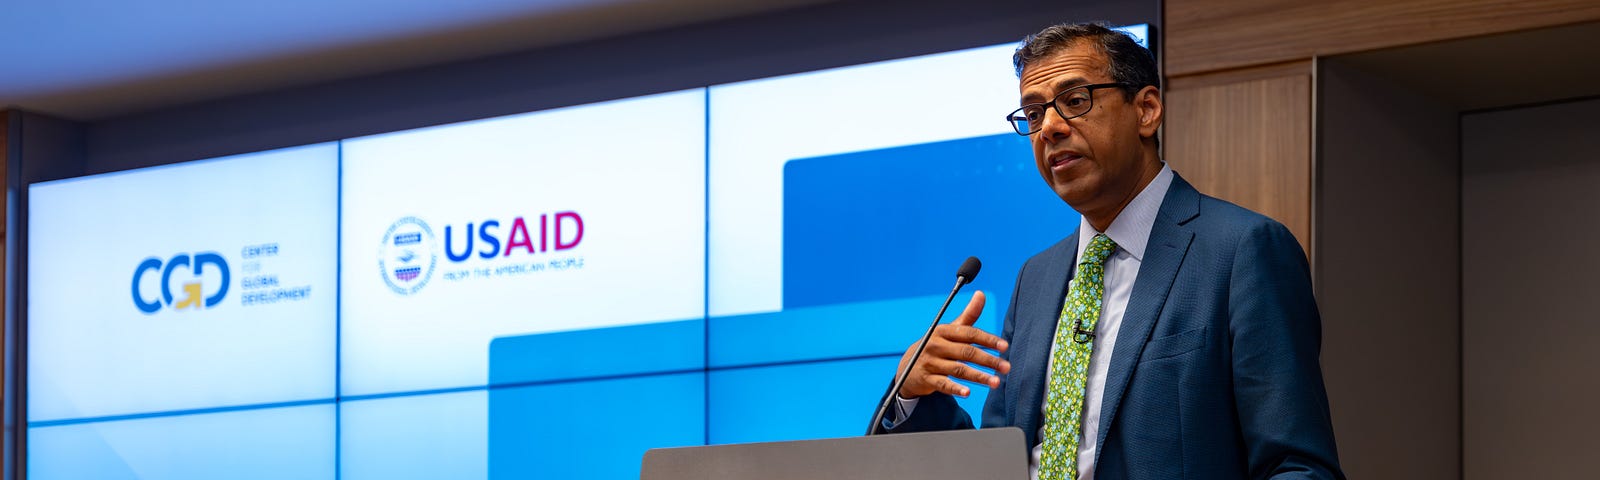 USAID Assistant Administrator for Global Health Dr. Atul Gawande speaks into a microphone while standing behind a podium adorned with the logo CGD. Behind him is an electronic display with the logos of CGD and USAID.